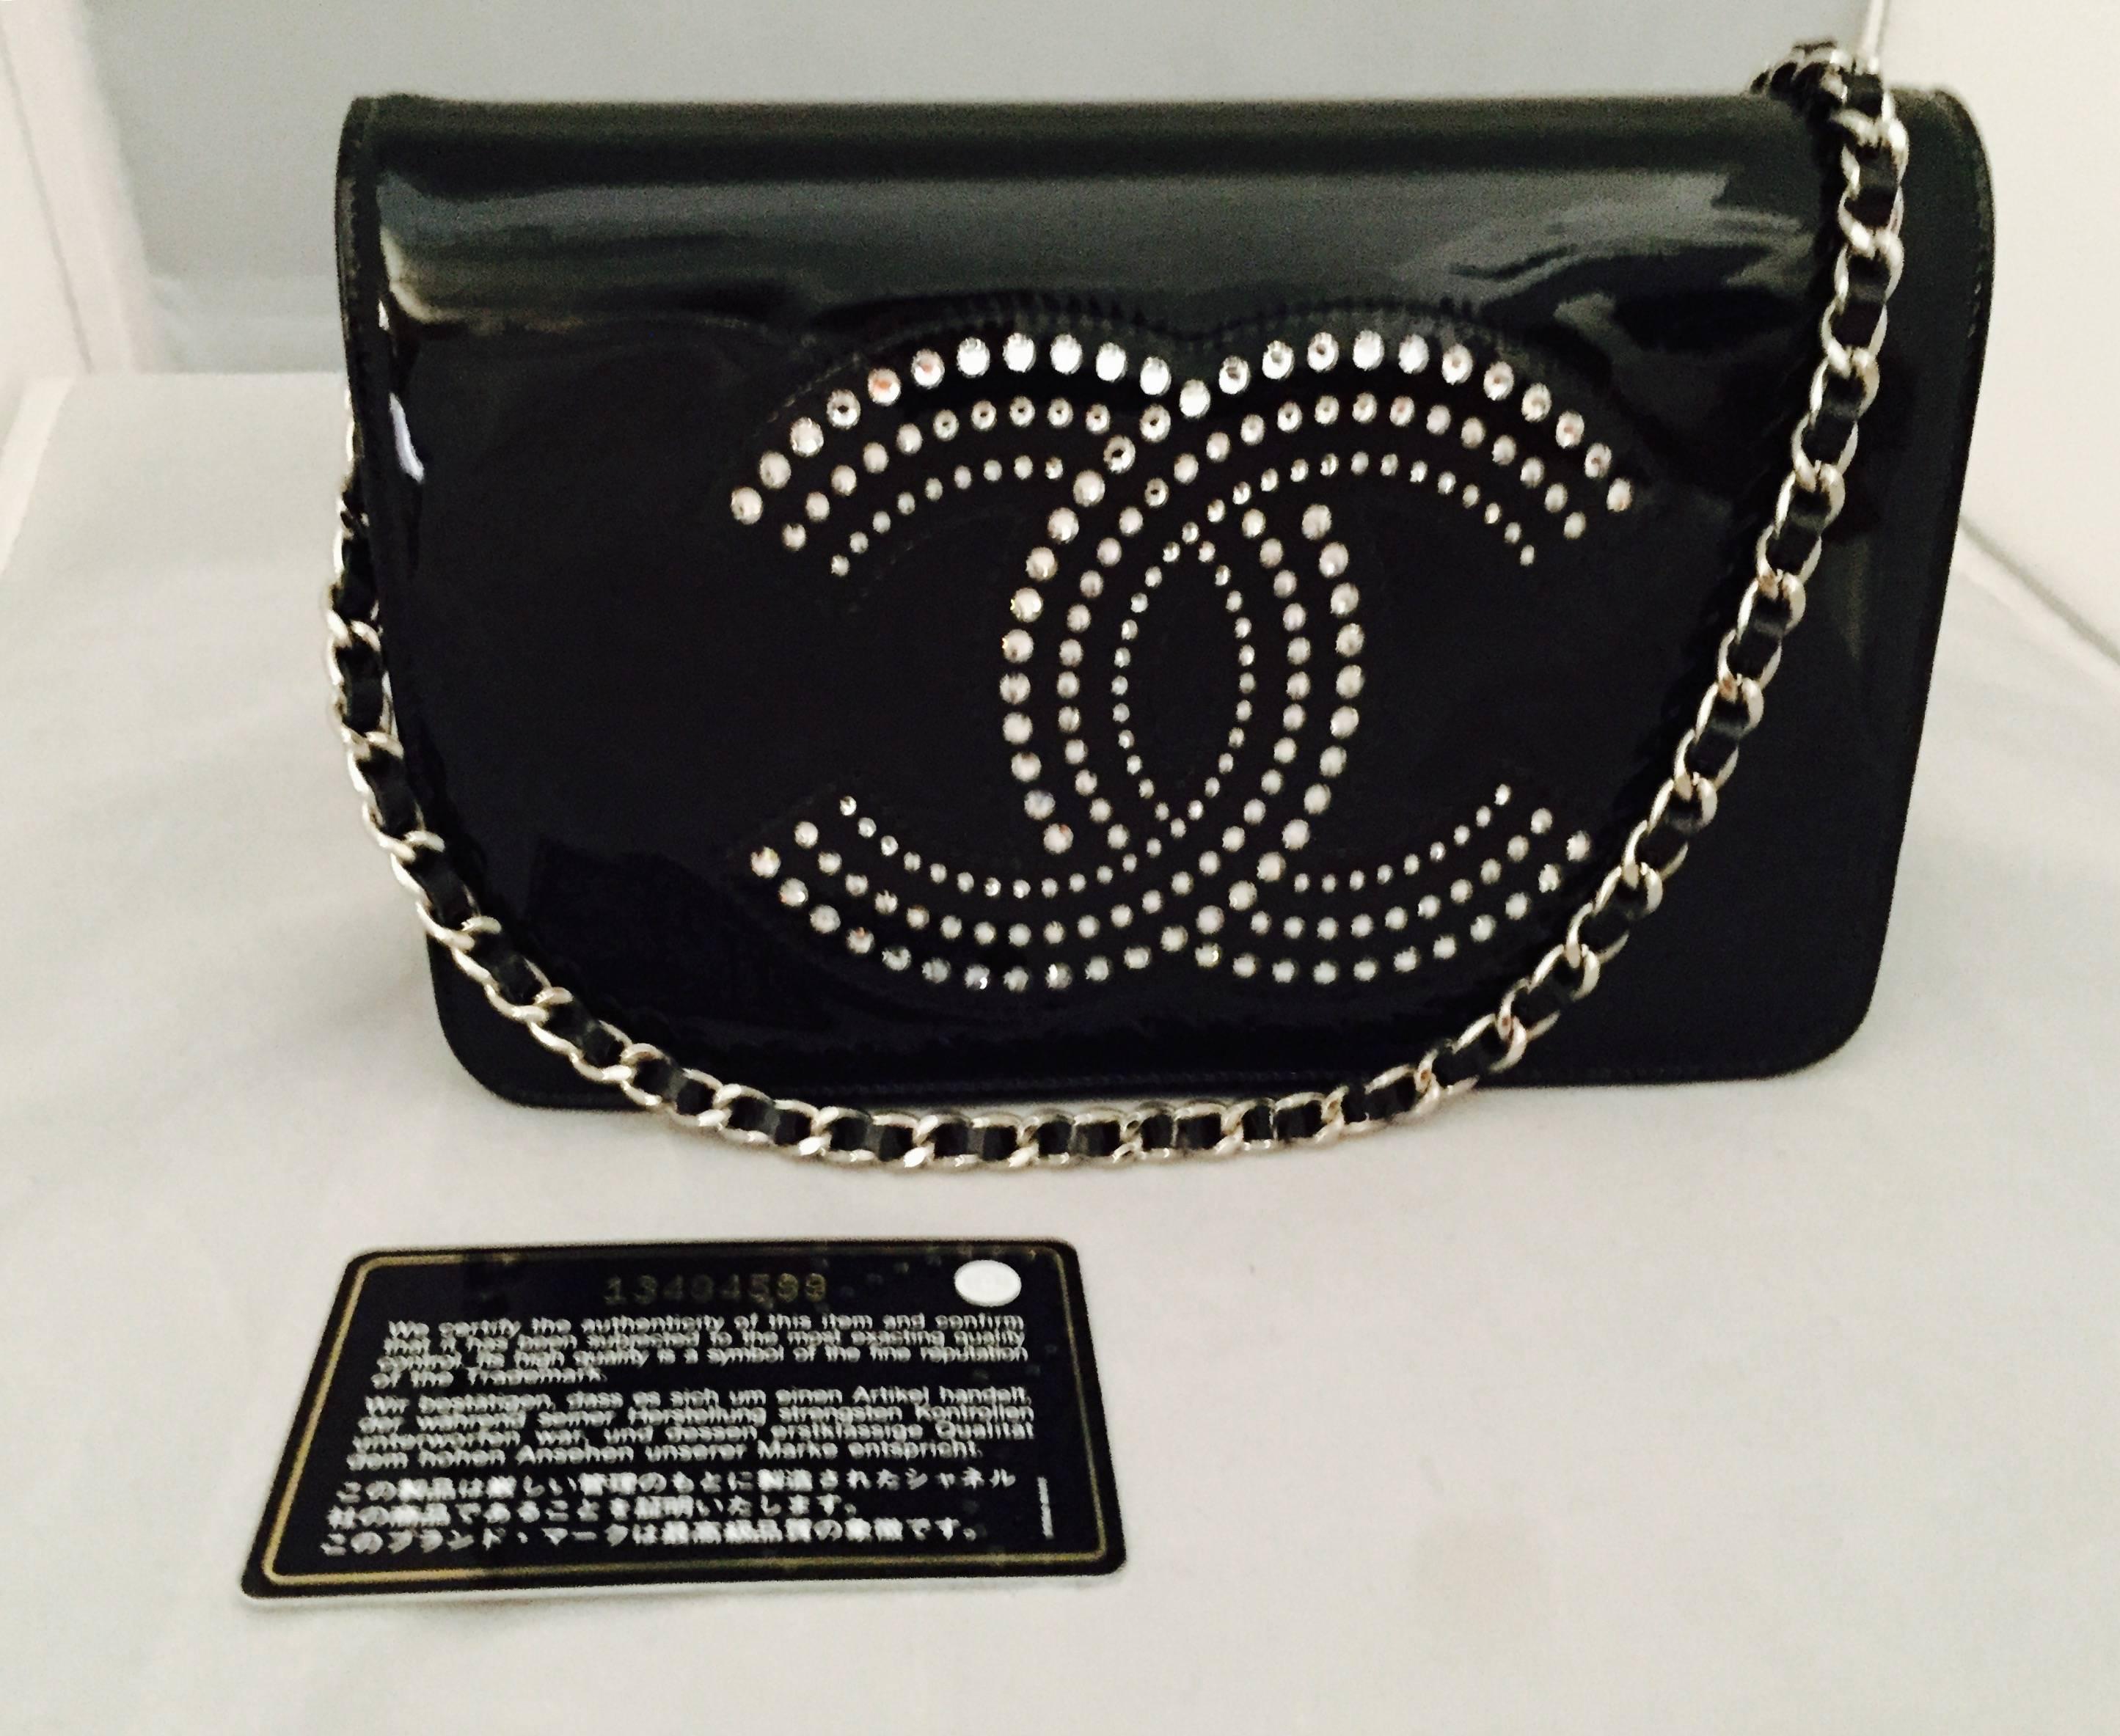 Dazzling Limited Edition Chanel Black Patent Leather WOC With Strass Crystals 1